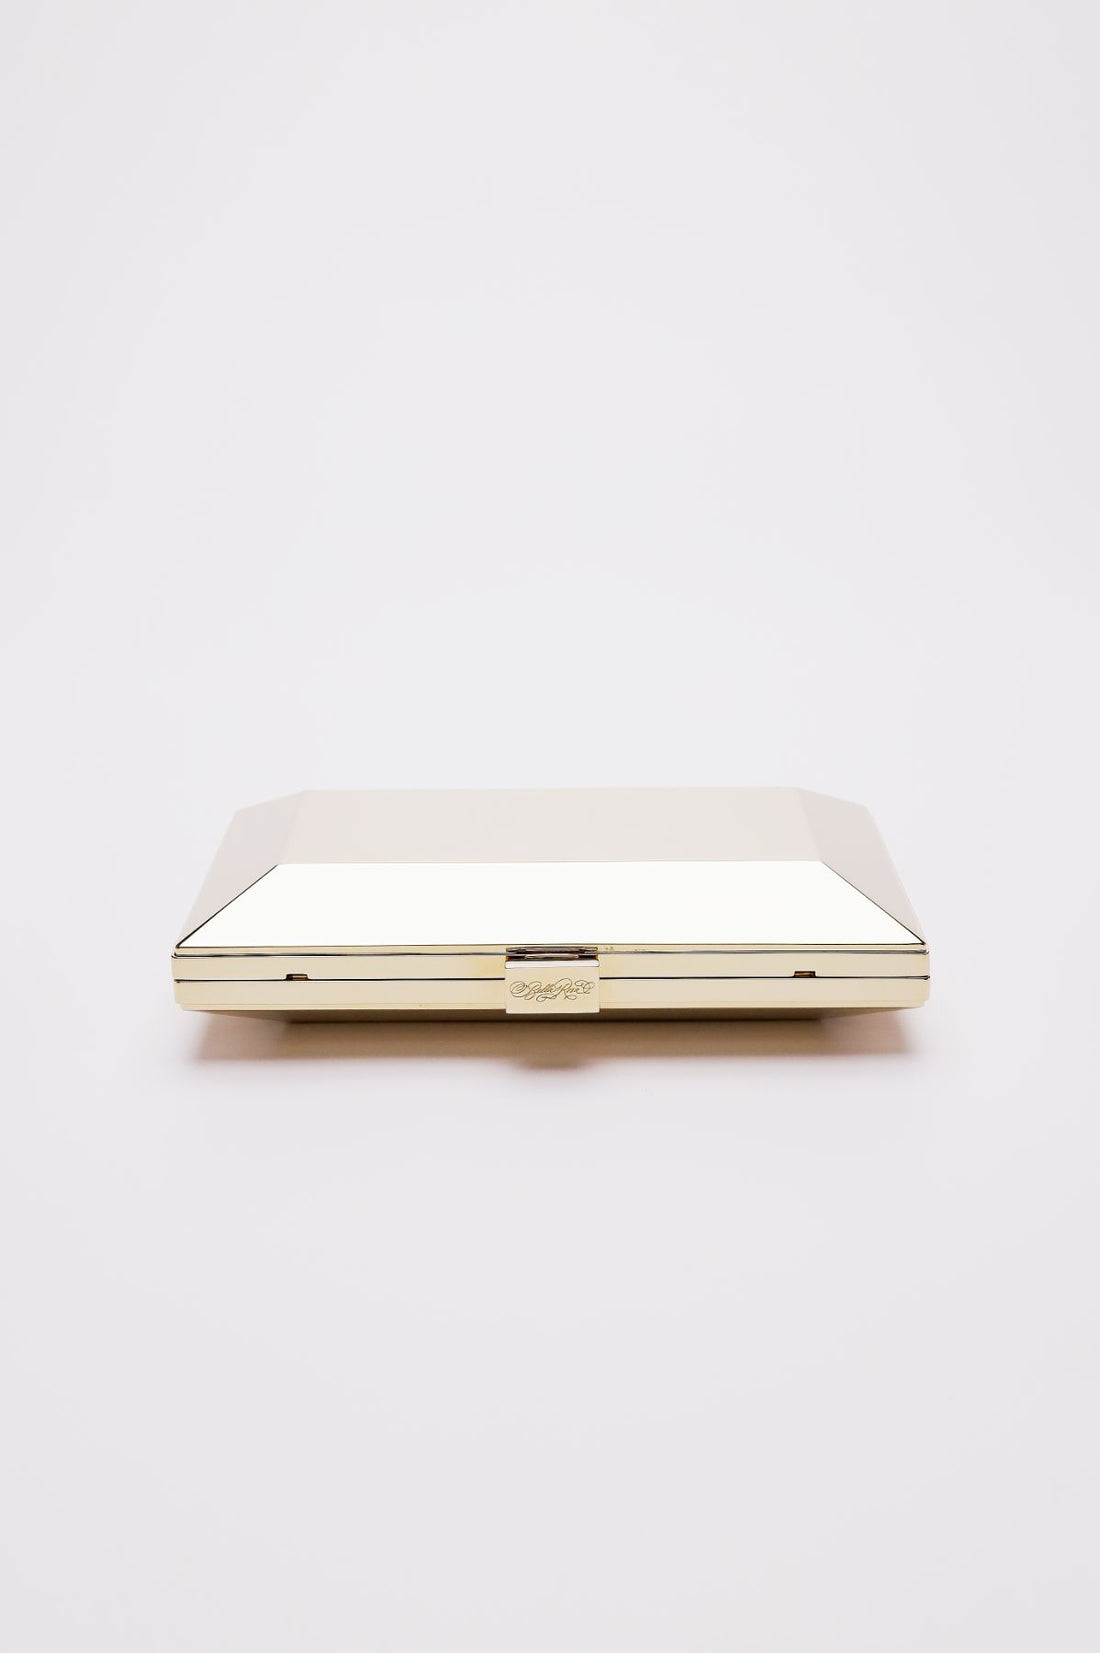 Top closed view of Milan geometric clutch in gold.